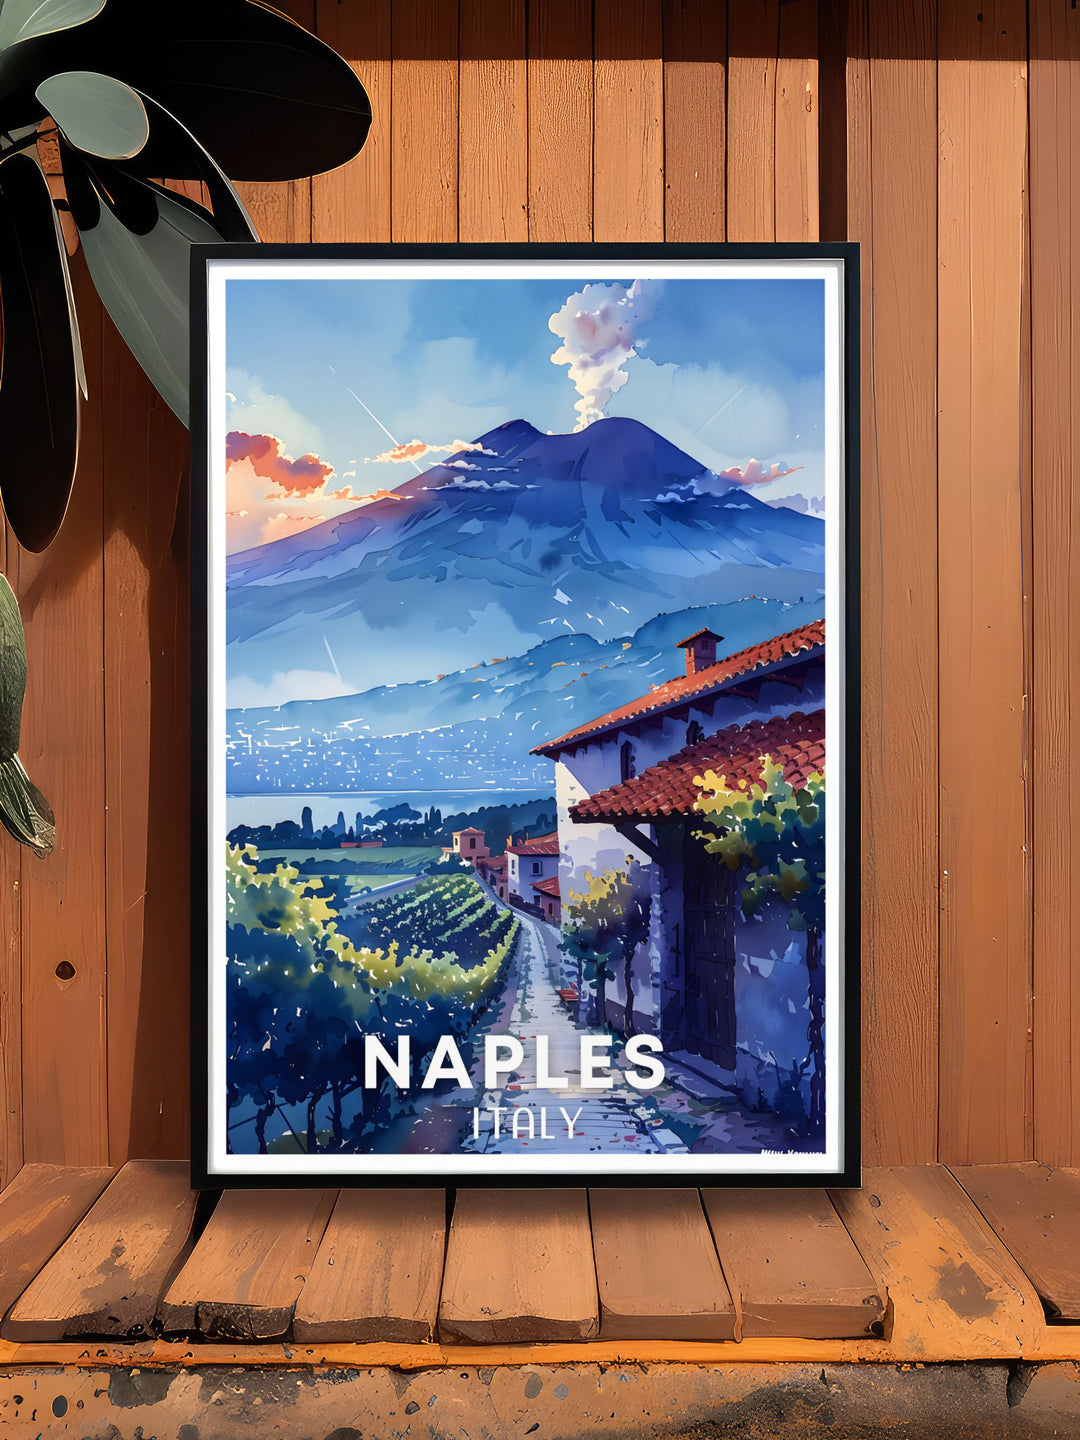 Stunning NAPLES Wall Art displaying the bustling life of Naples Italy with Mount Vesuvius in the backdrop. Ideal for adding a touch of Italy to your home decor. Great for travel enthusiasts.